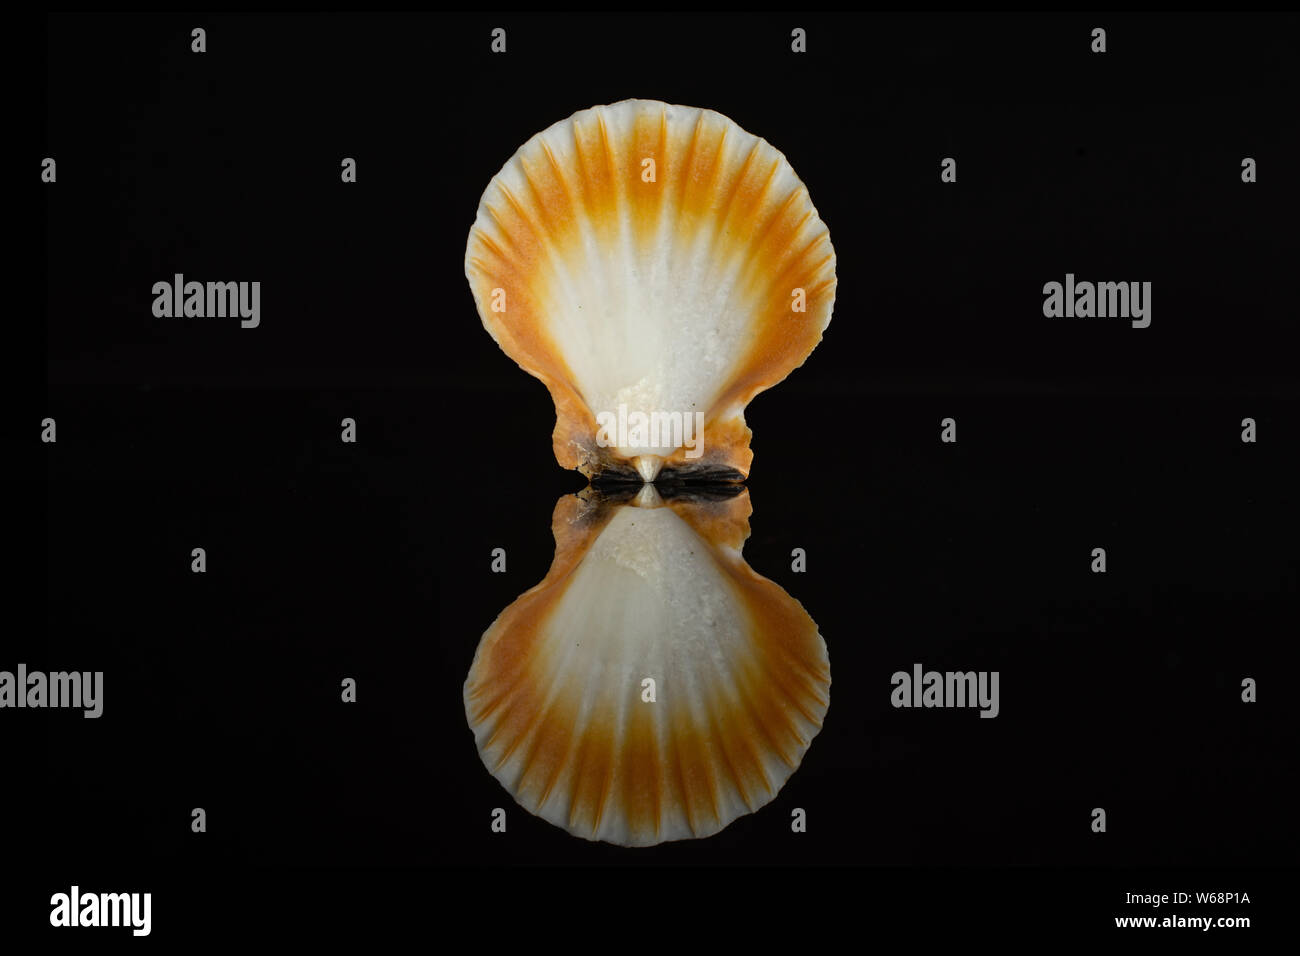 One whole mollusc shell with orange edge isolated on black glass Stock Photo